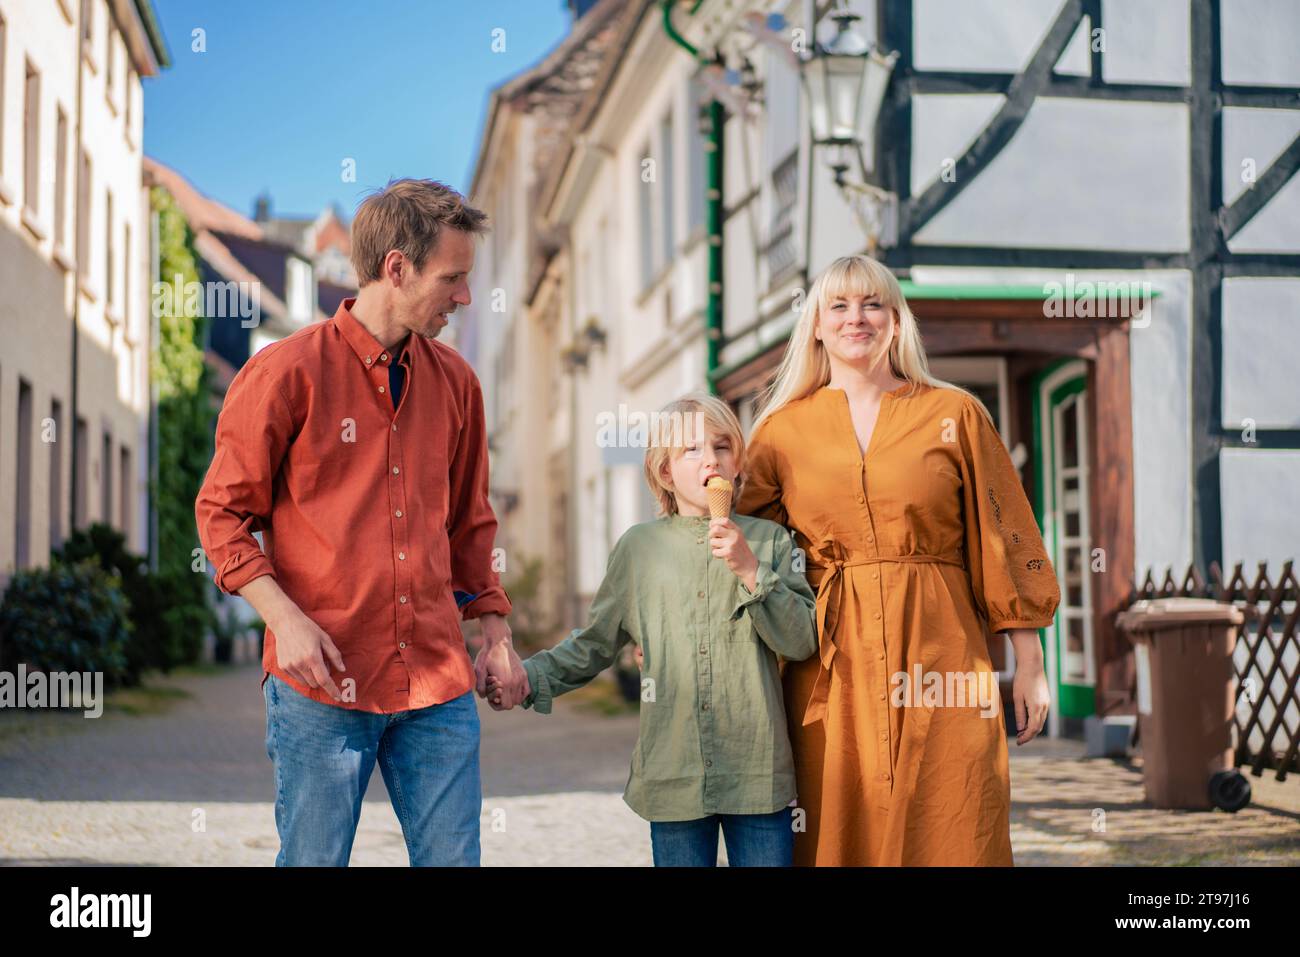 Smiling parents walking with son eating ice cream cone in town Stock Photo